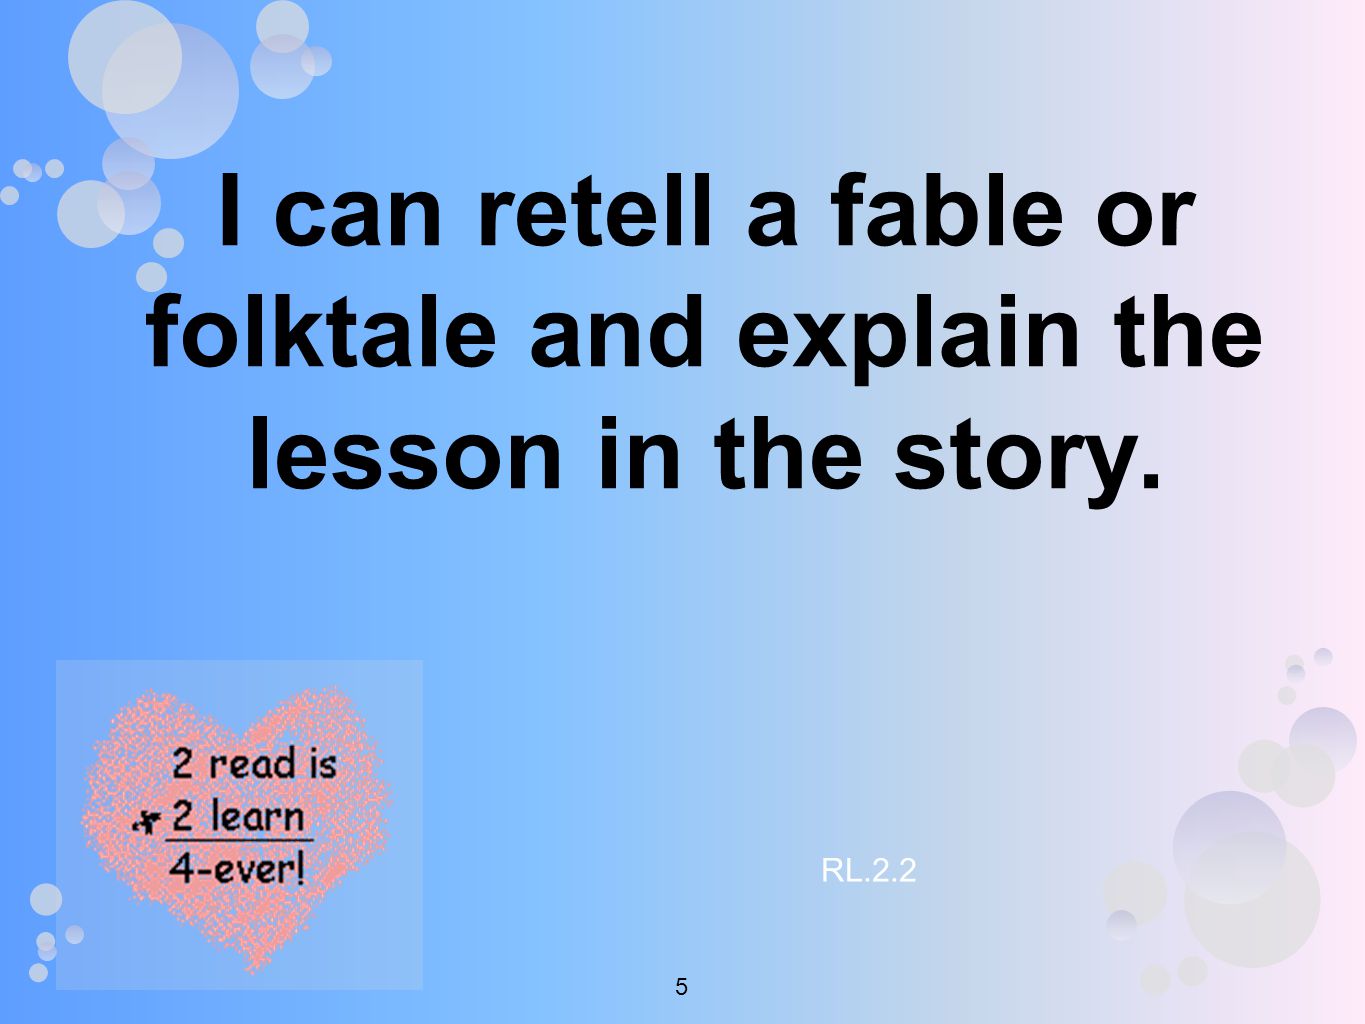 I can retell a fable or folktale and explain the lesson in the story. RL.2.2 5